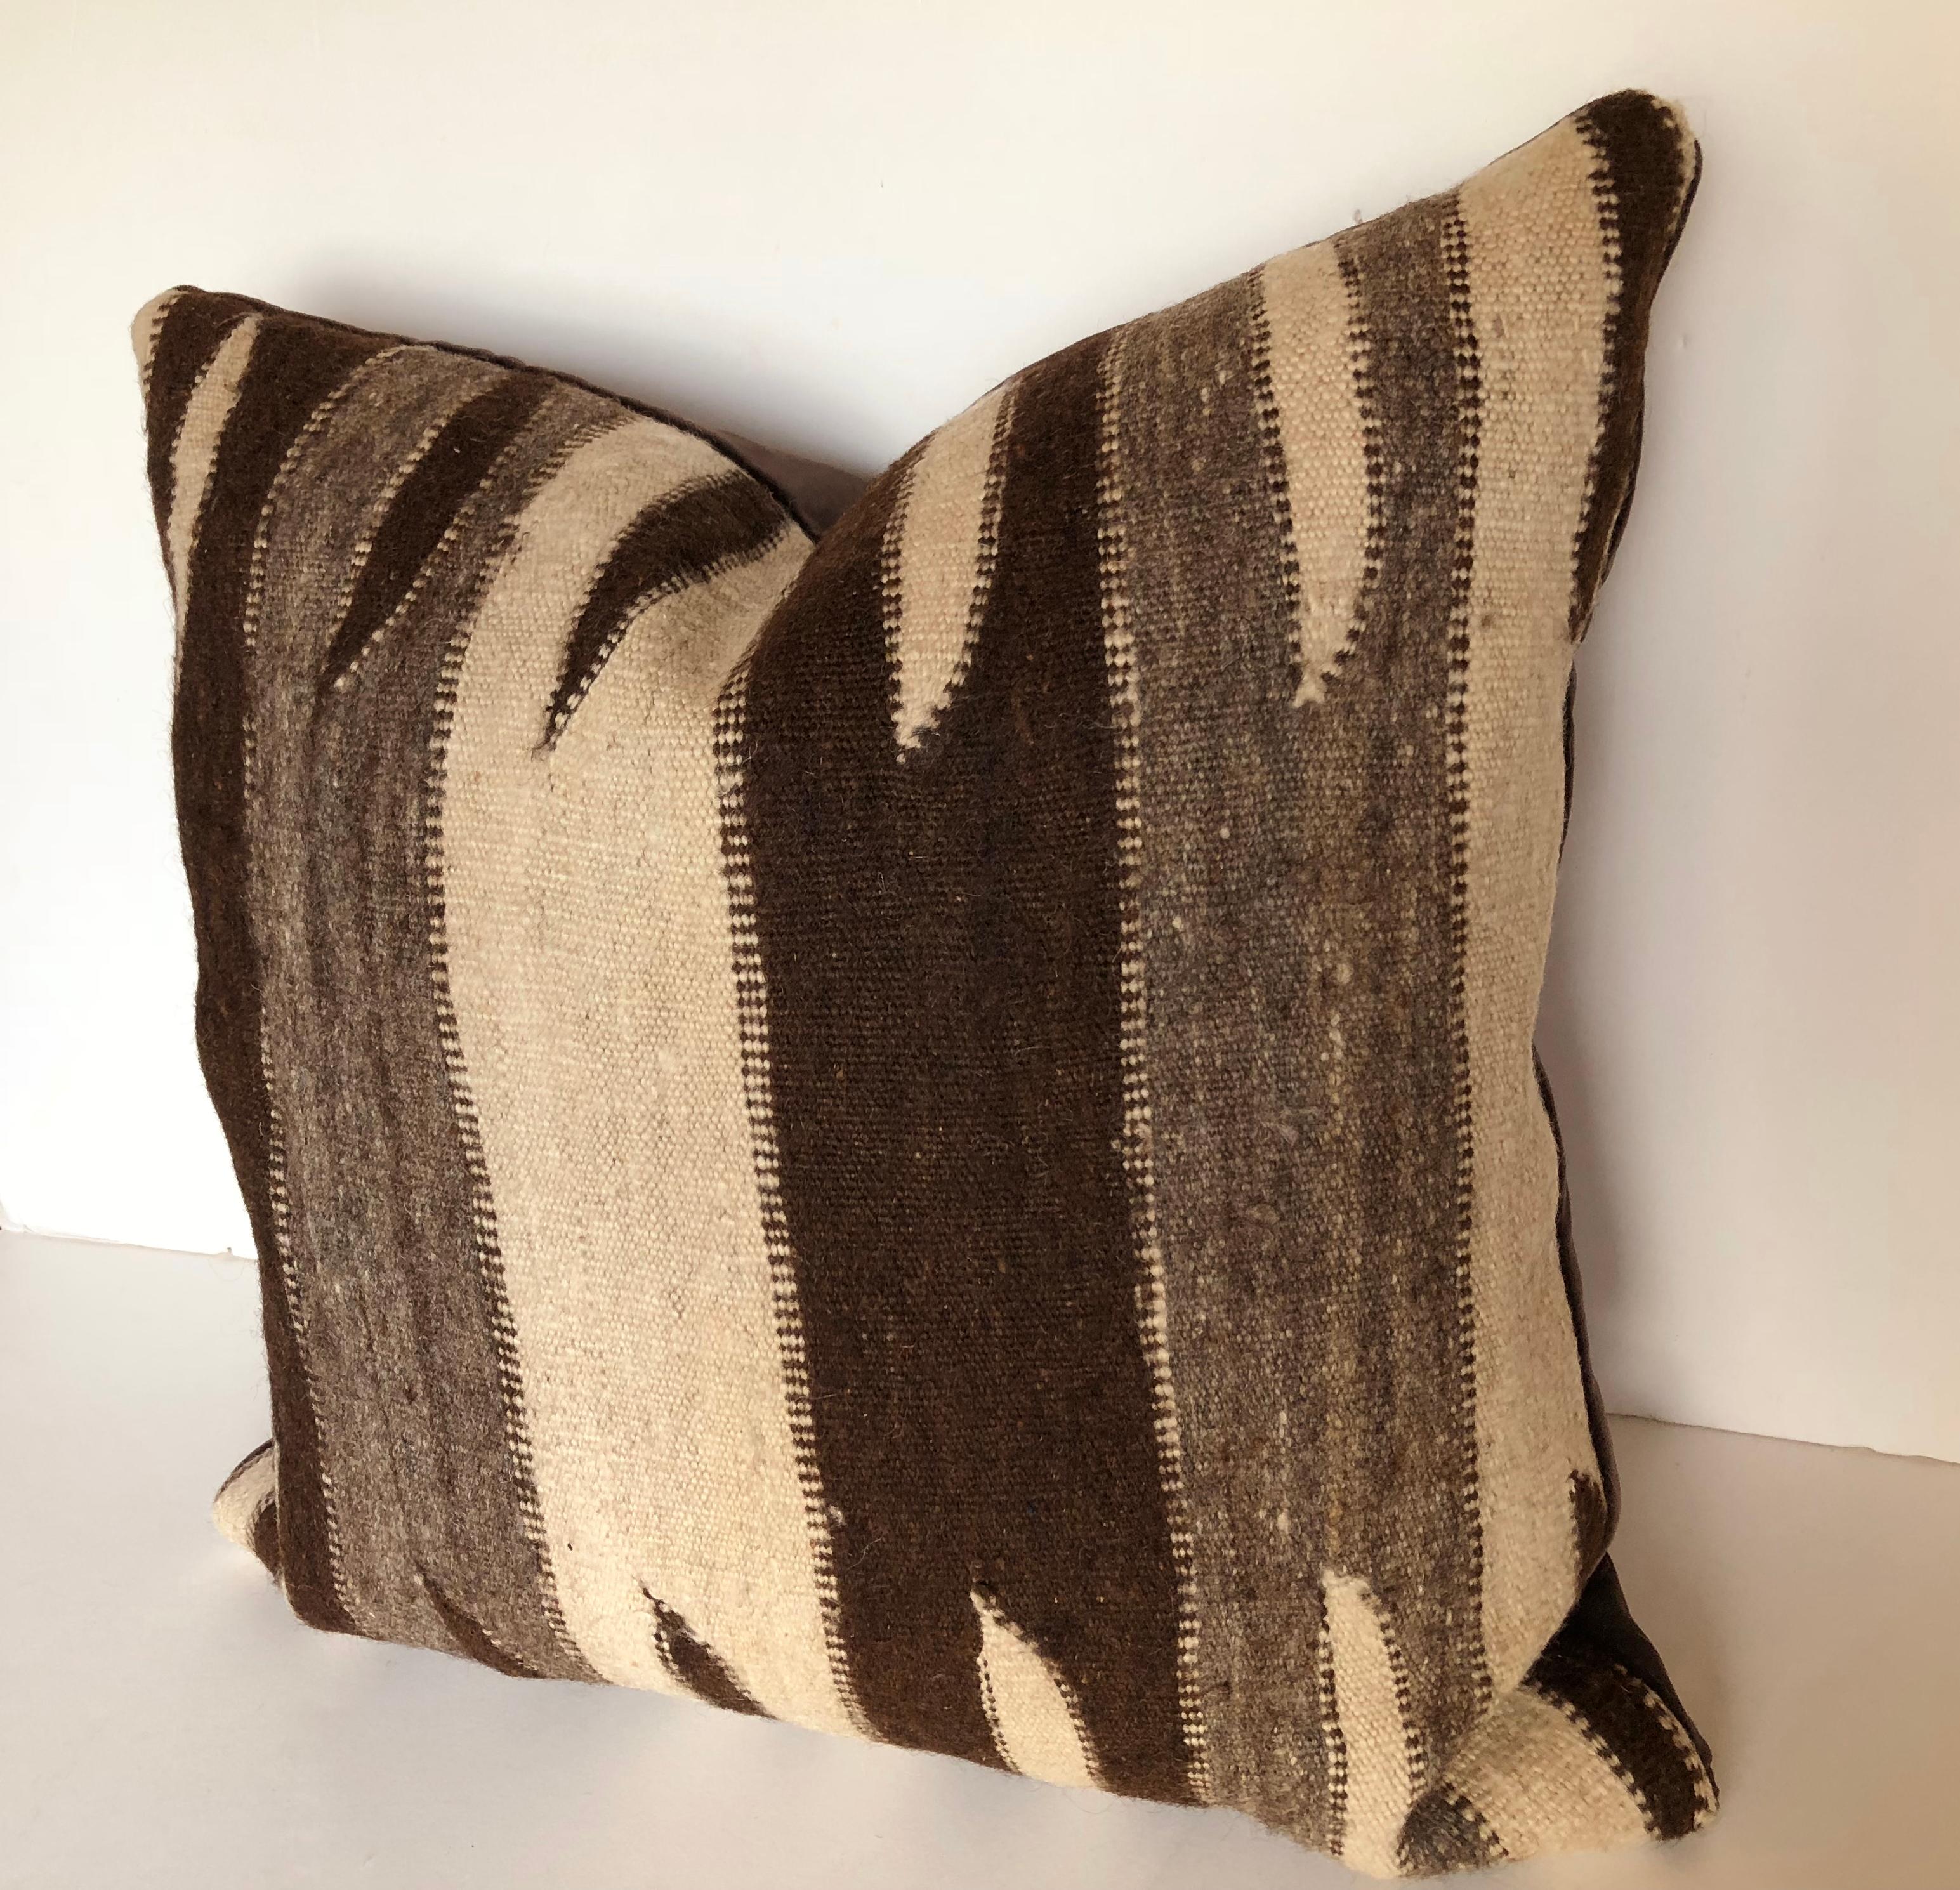 Custom pillow cut from a vintage Moroccan hand loomed wool rug from the Ourika Valley, Atlas Mountains. Wool is soft and lustrous, heavy weight with natural colors. Pillow is backed in down brown velvet with an insert of 50/50 down and feathers and